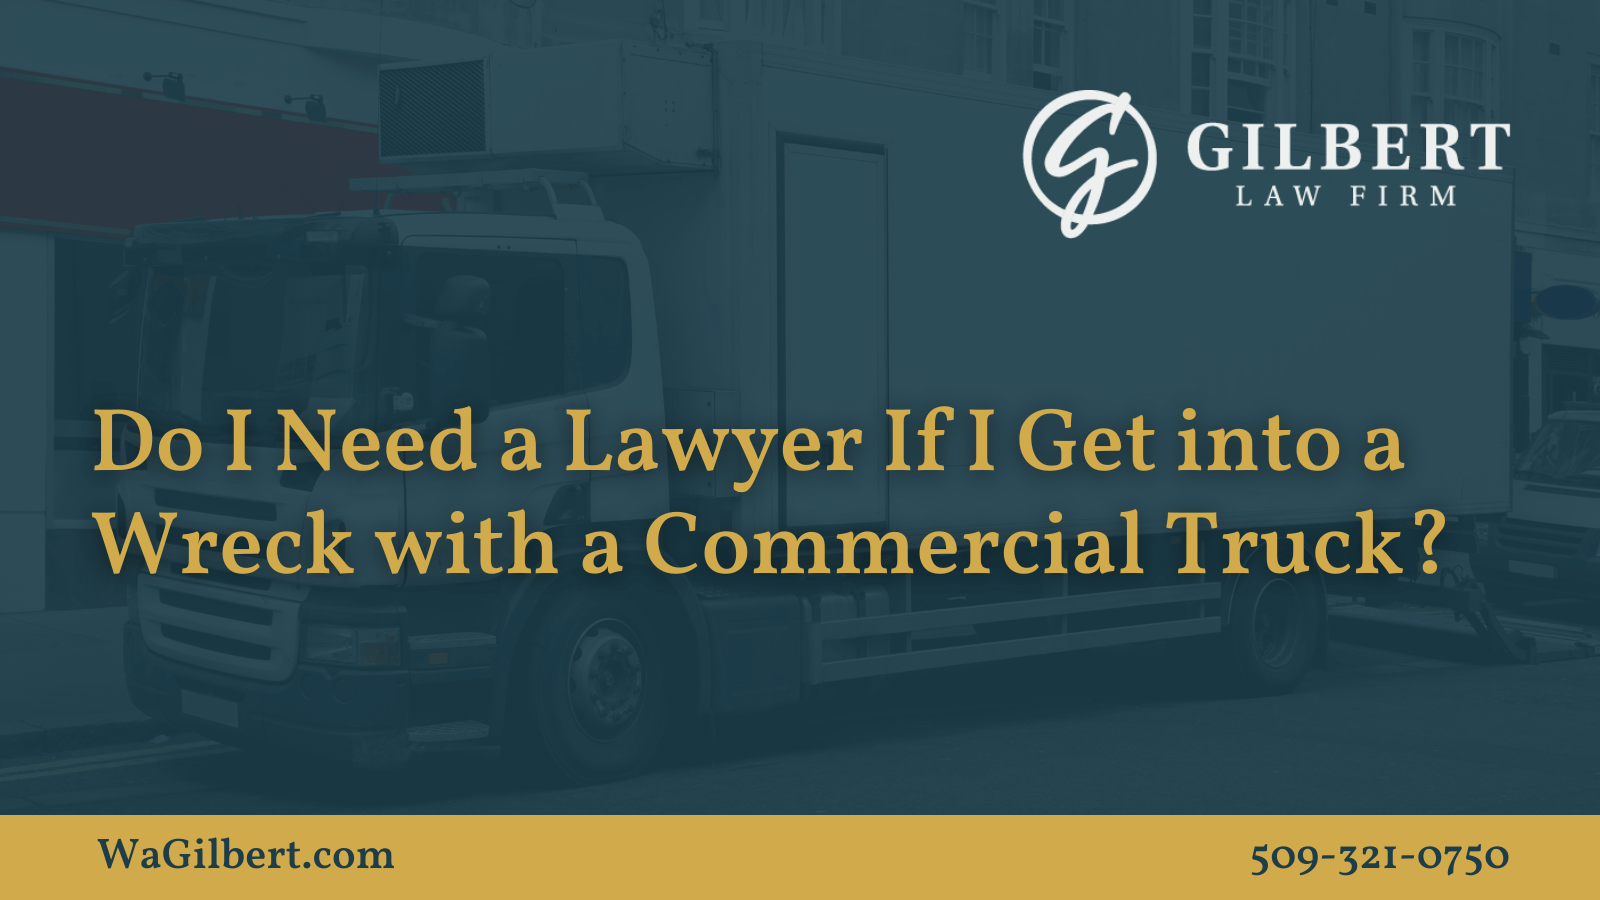 Do I Need a Lawyer If I Get into a Wreck with a Commercial Truck | Gilbert Law Firm Spokane Washington